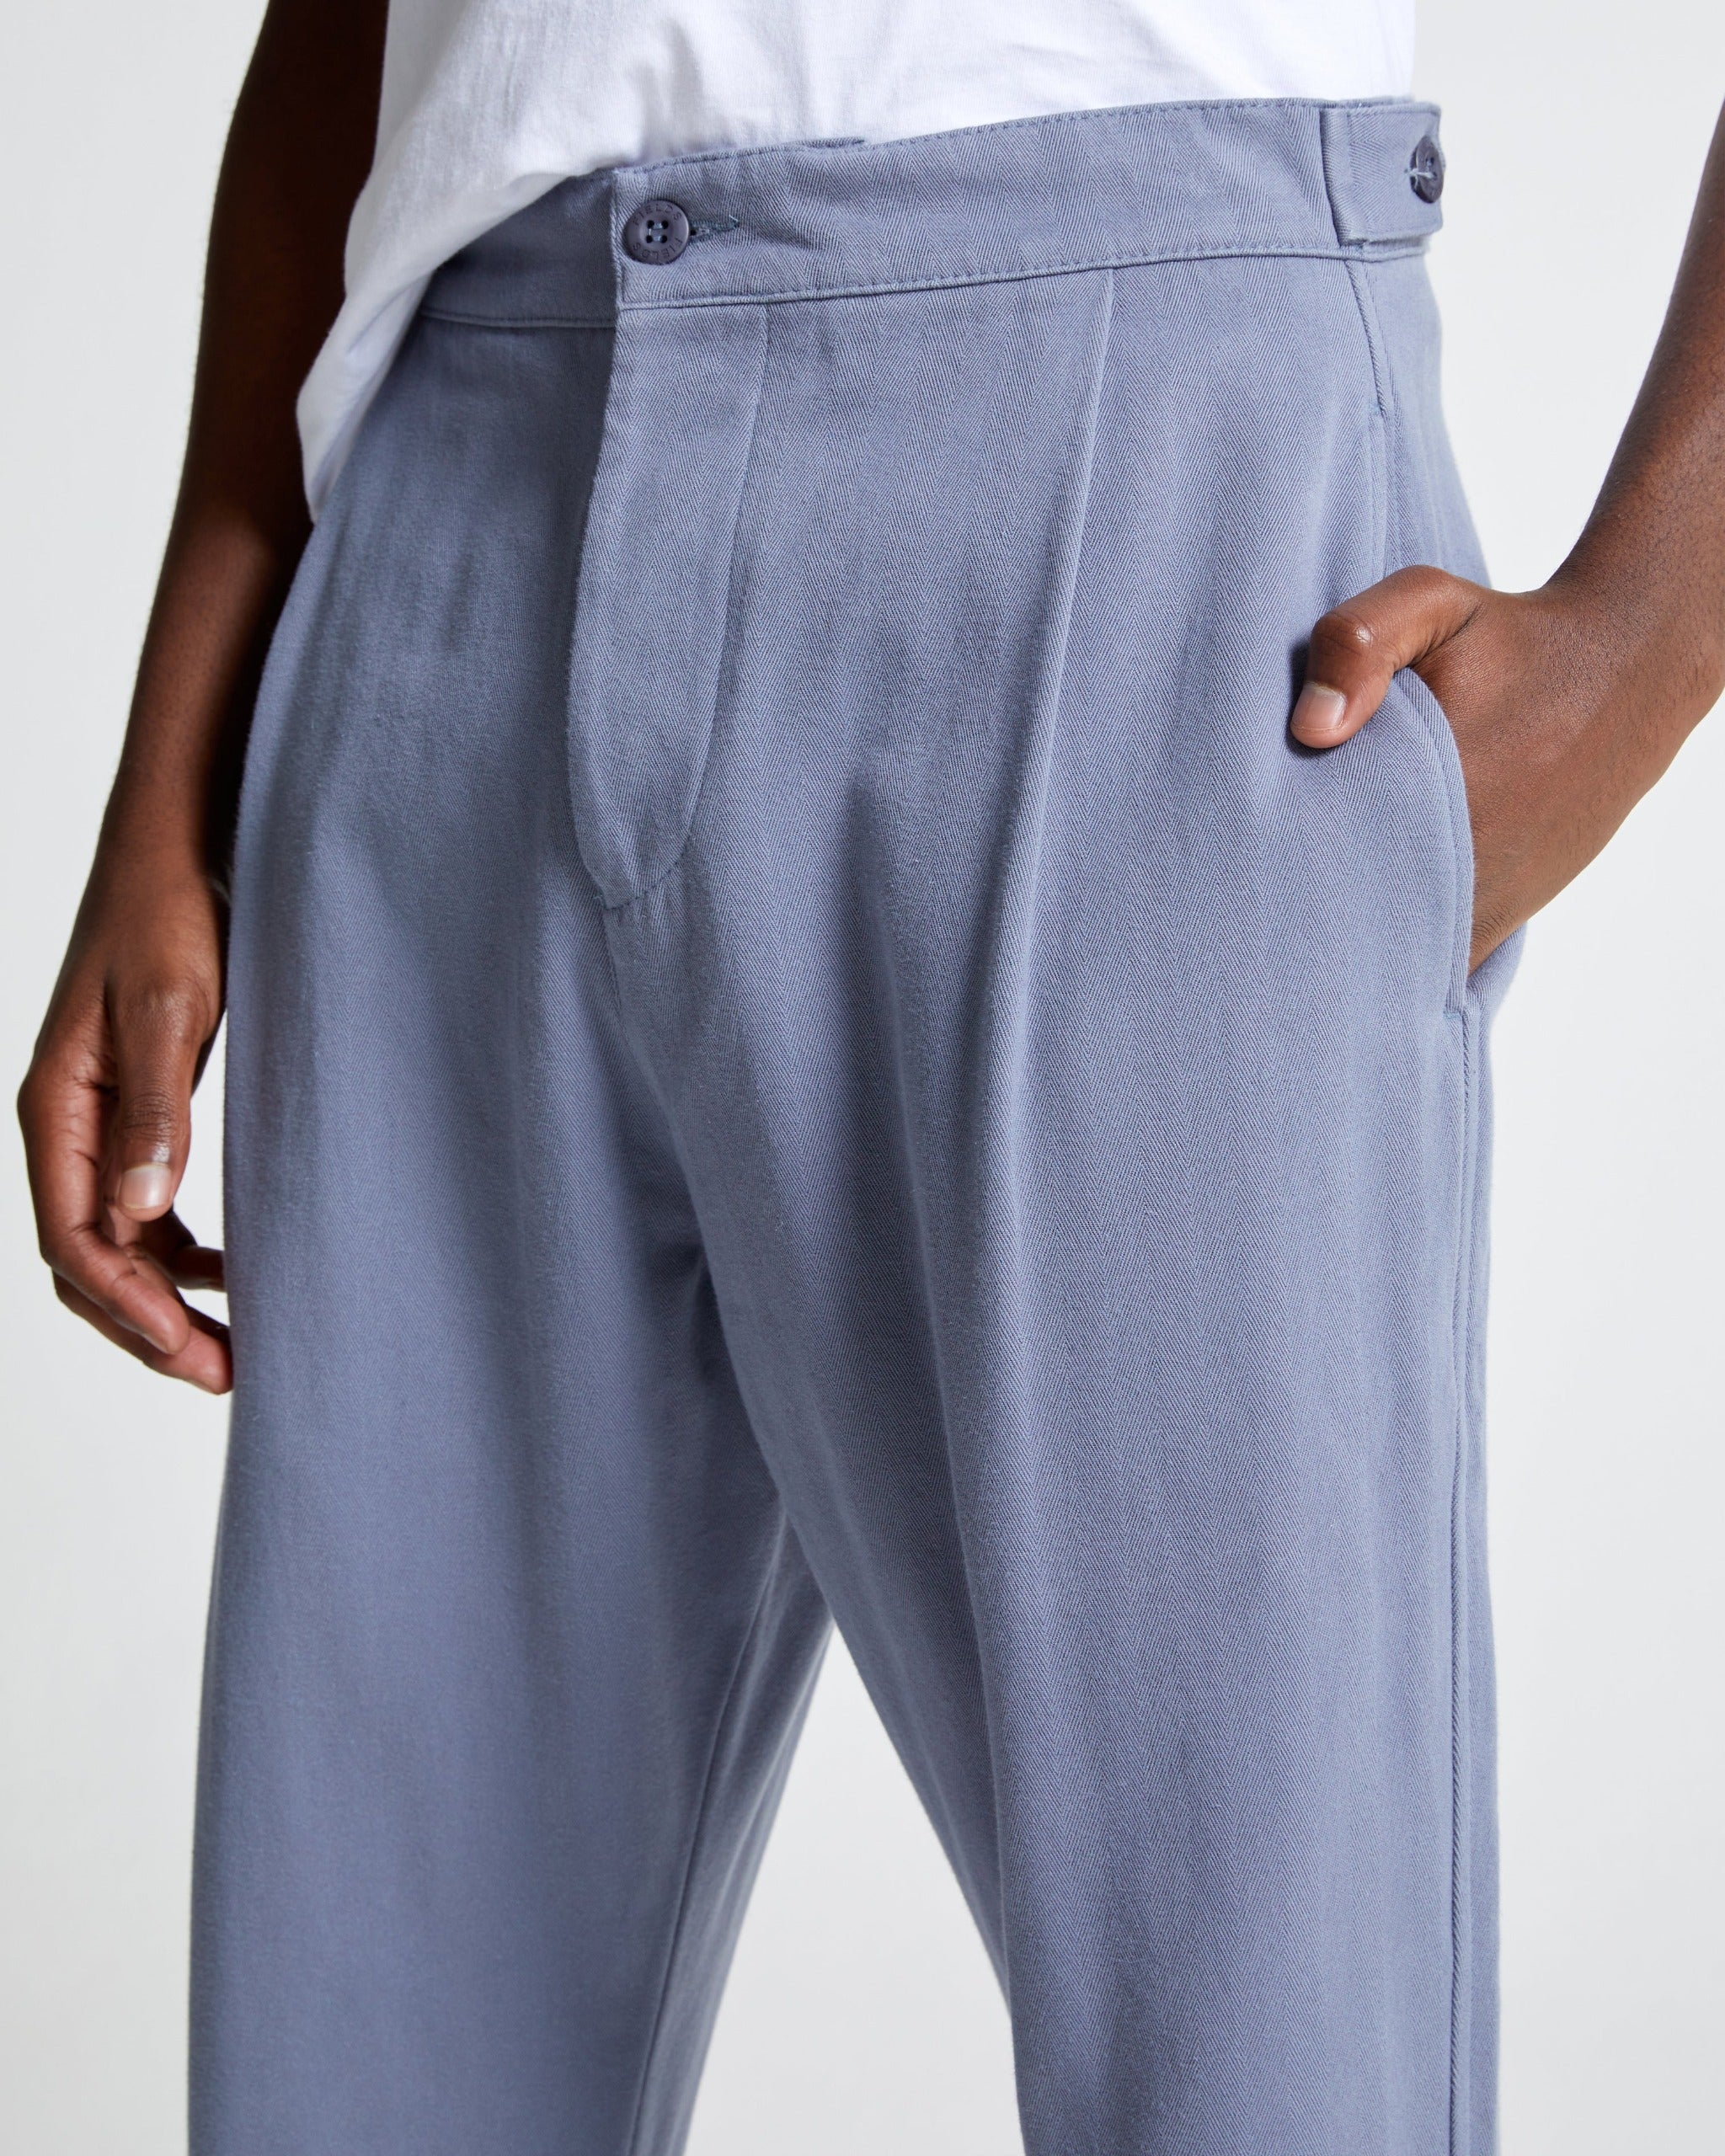 The Cotton Weekend Trouser in Folkstone Grey